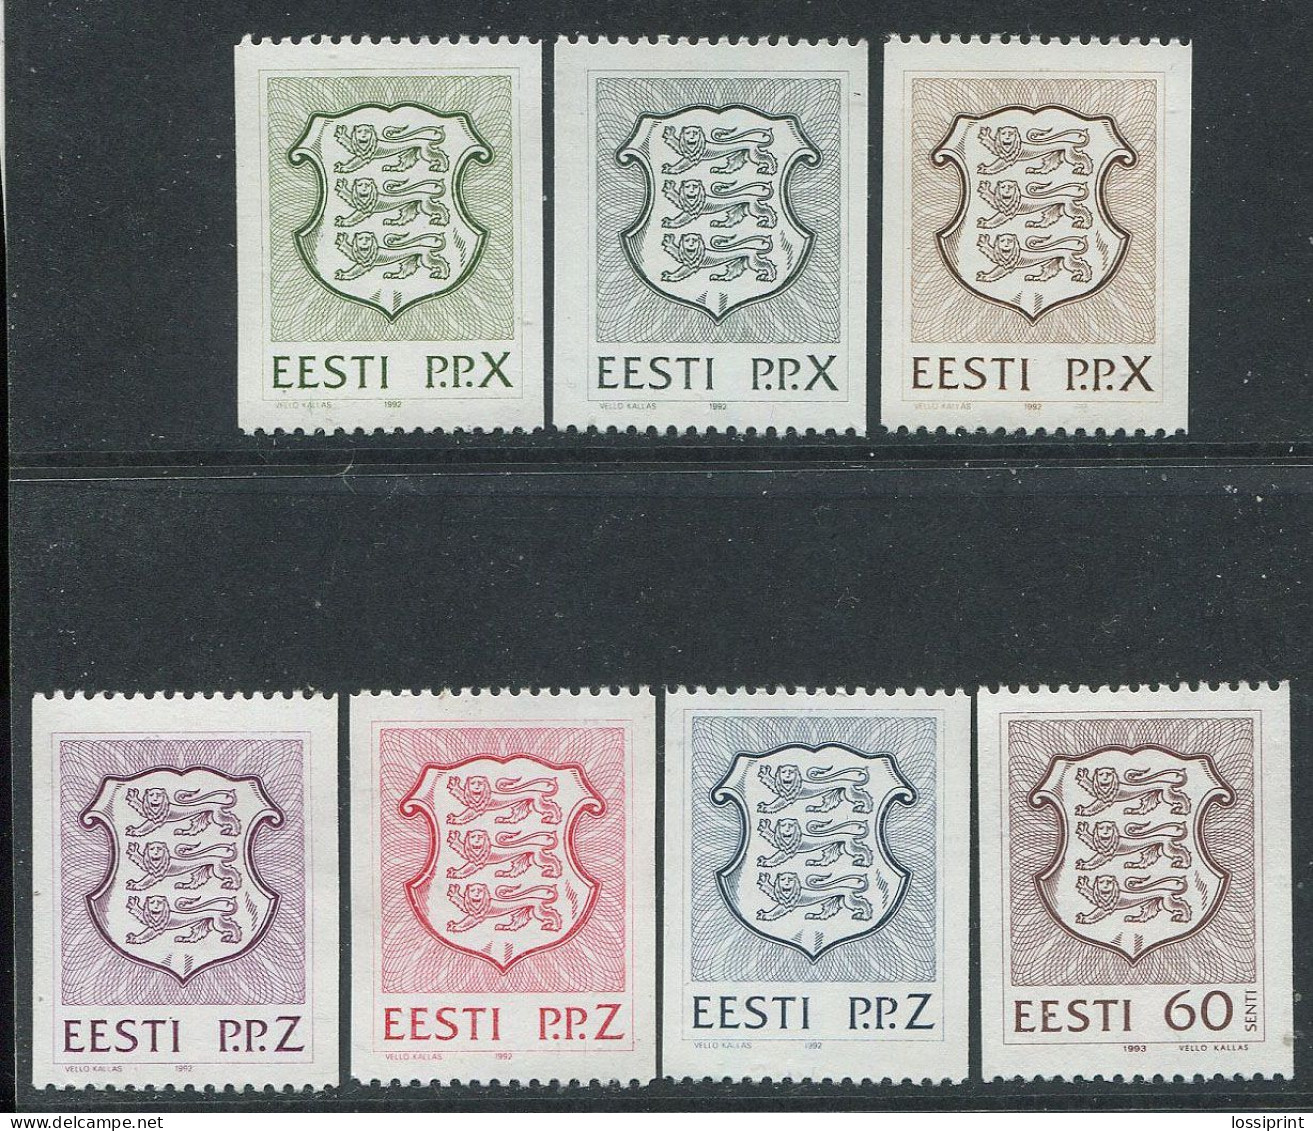 Estonia:Unused Stamps Serie Coat Of Arms, P.P.X, P.P.Z And 60 Cents, 1992-1993, MNH - Stamps